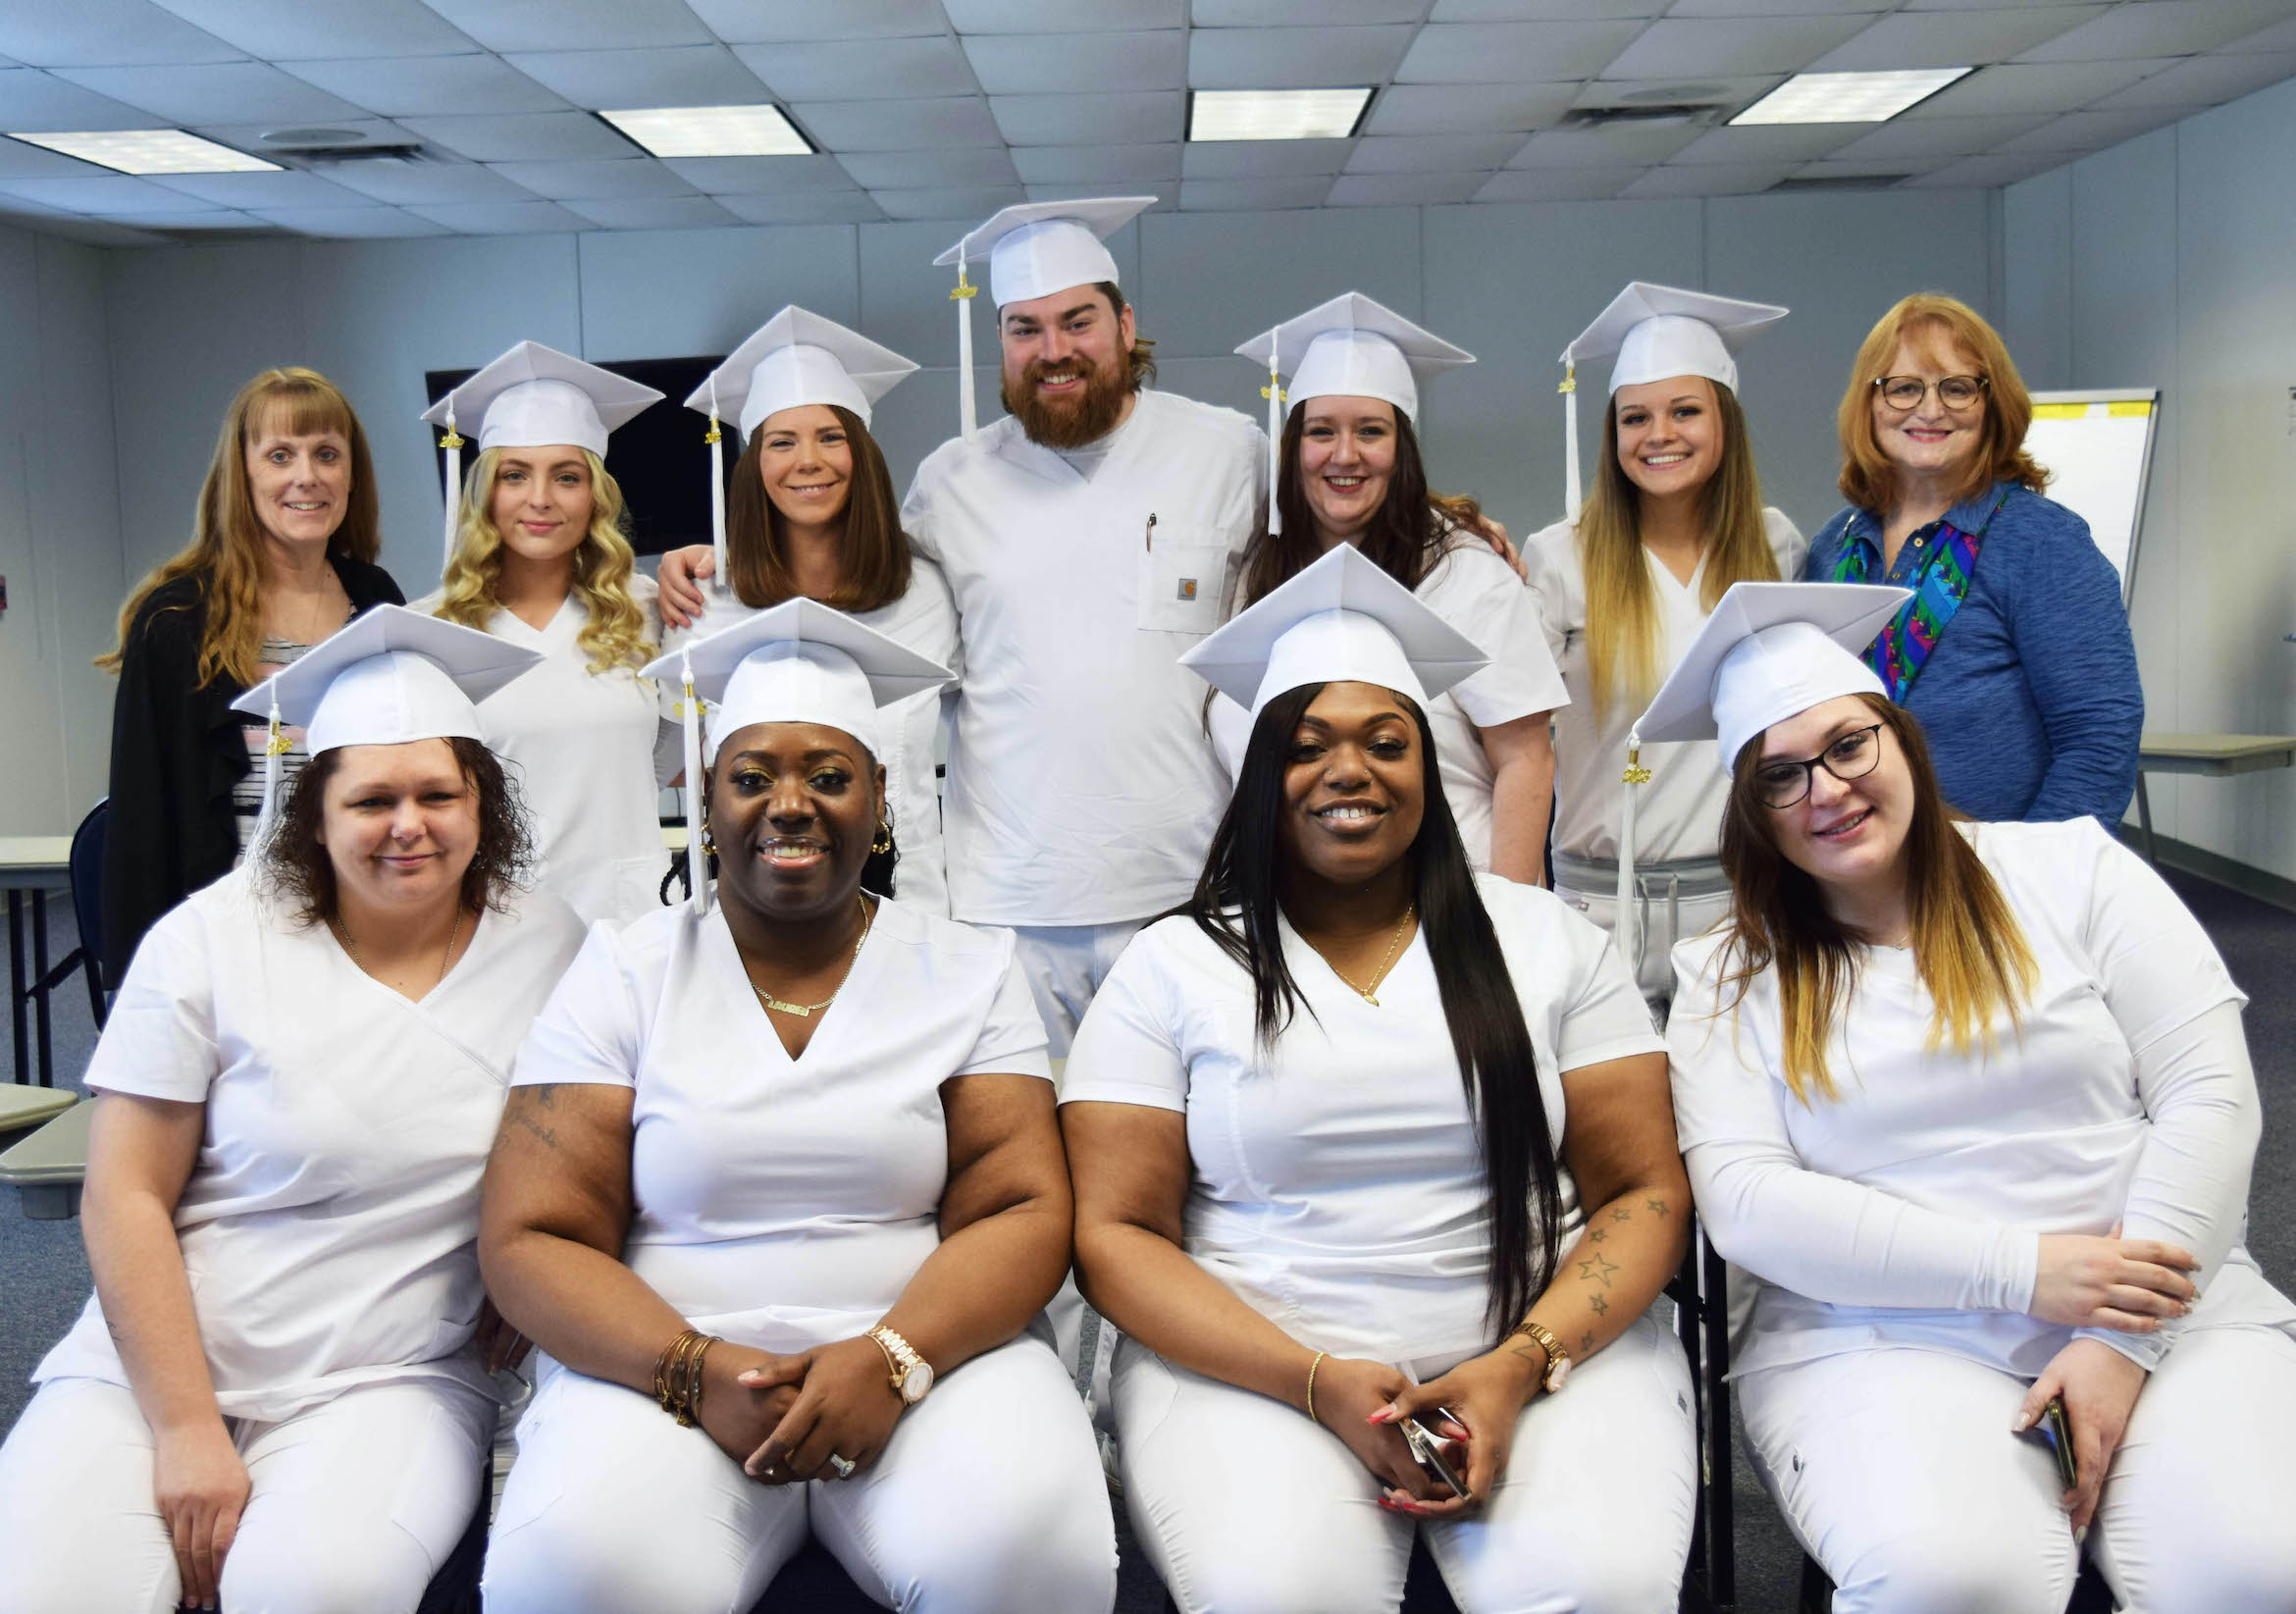 Pictured, front row from left: Katie Dunning, Lauren Wiley, Tikera Ralands and Nina D'Arcangelo; back row, from left: teacher Debra Dittmer, Arianna Chiappone, Danielle Walker, Brennen O'Connor, Ashleigh Brownlee, Emily Koerner and teacher Roxanne Burke-Smith.